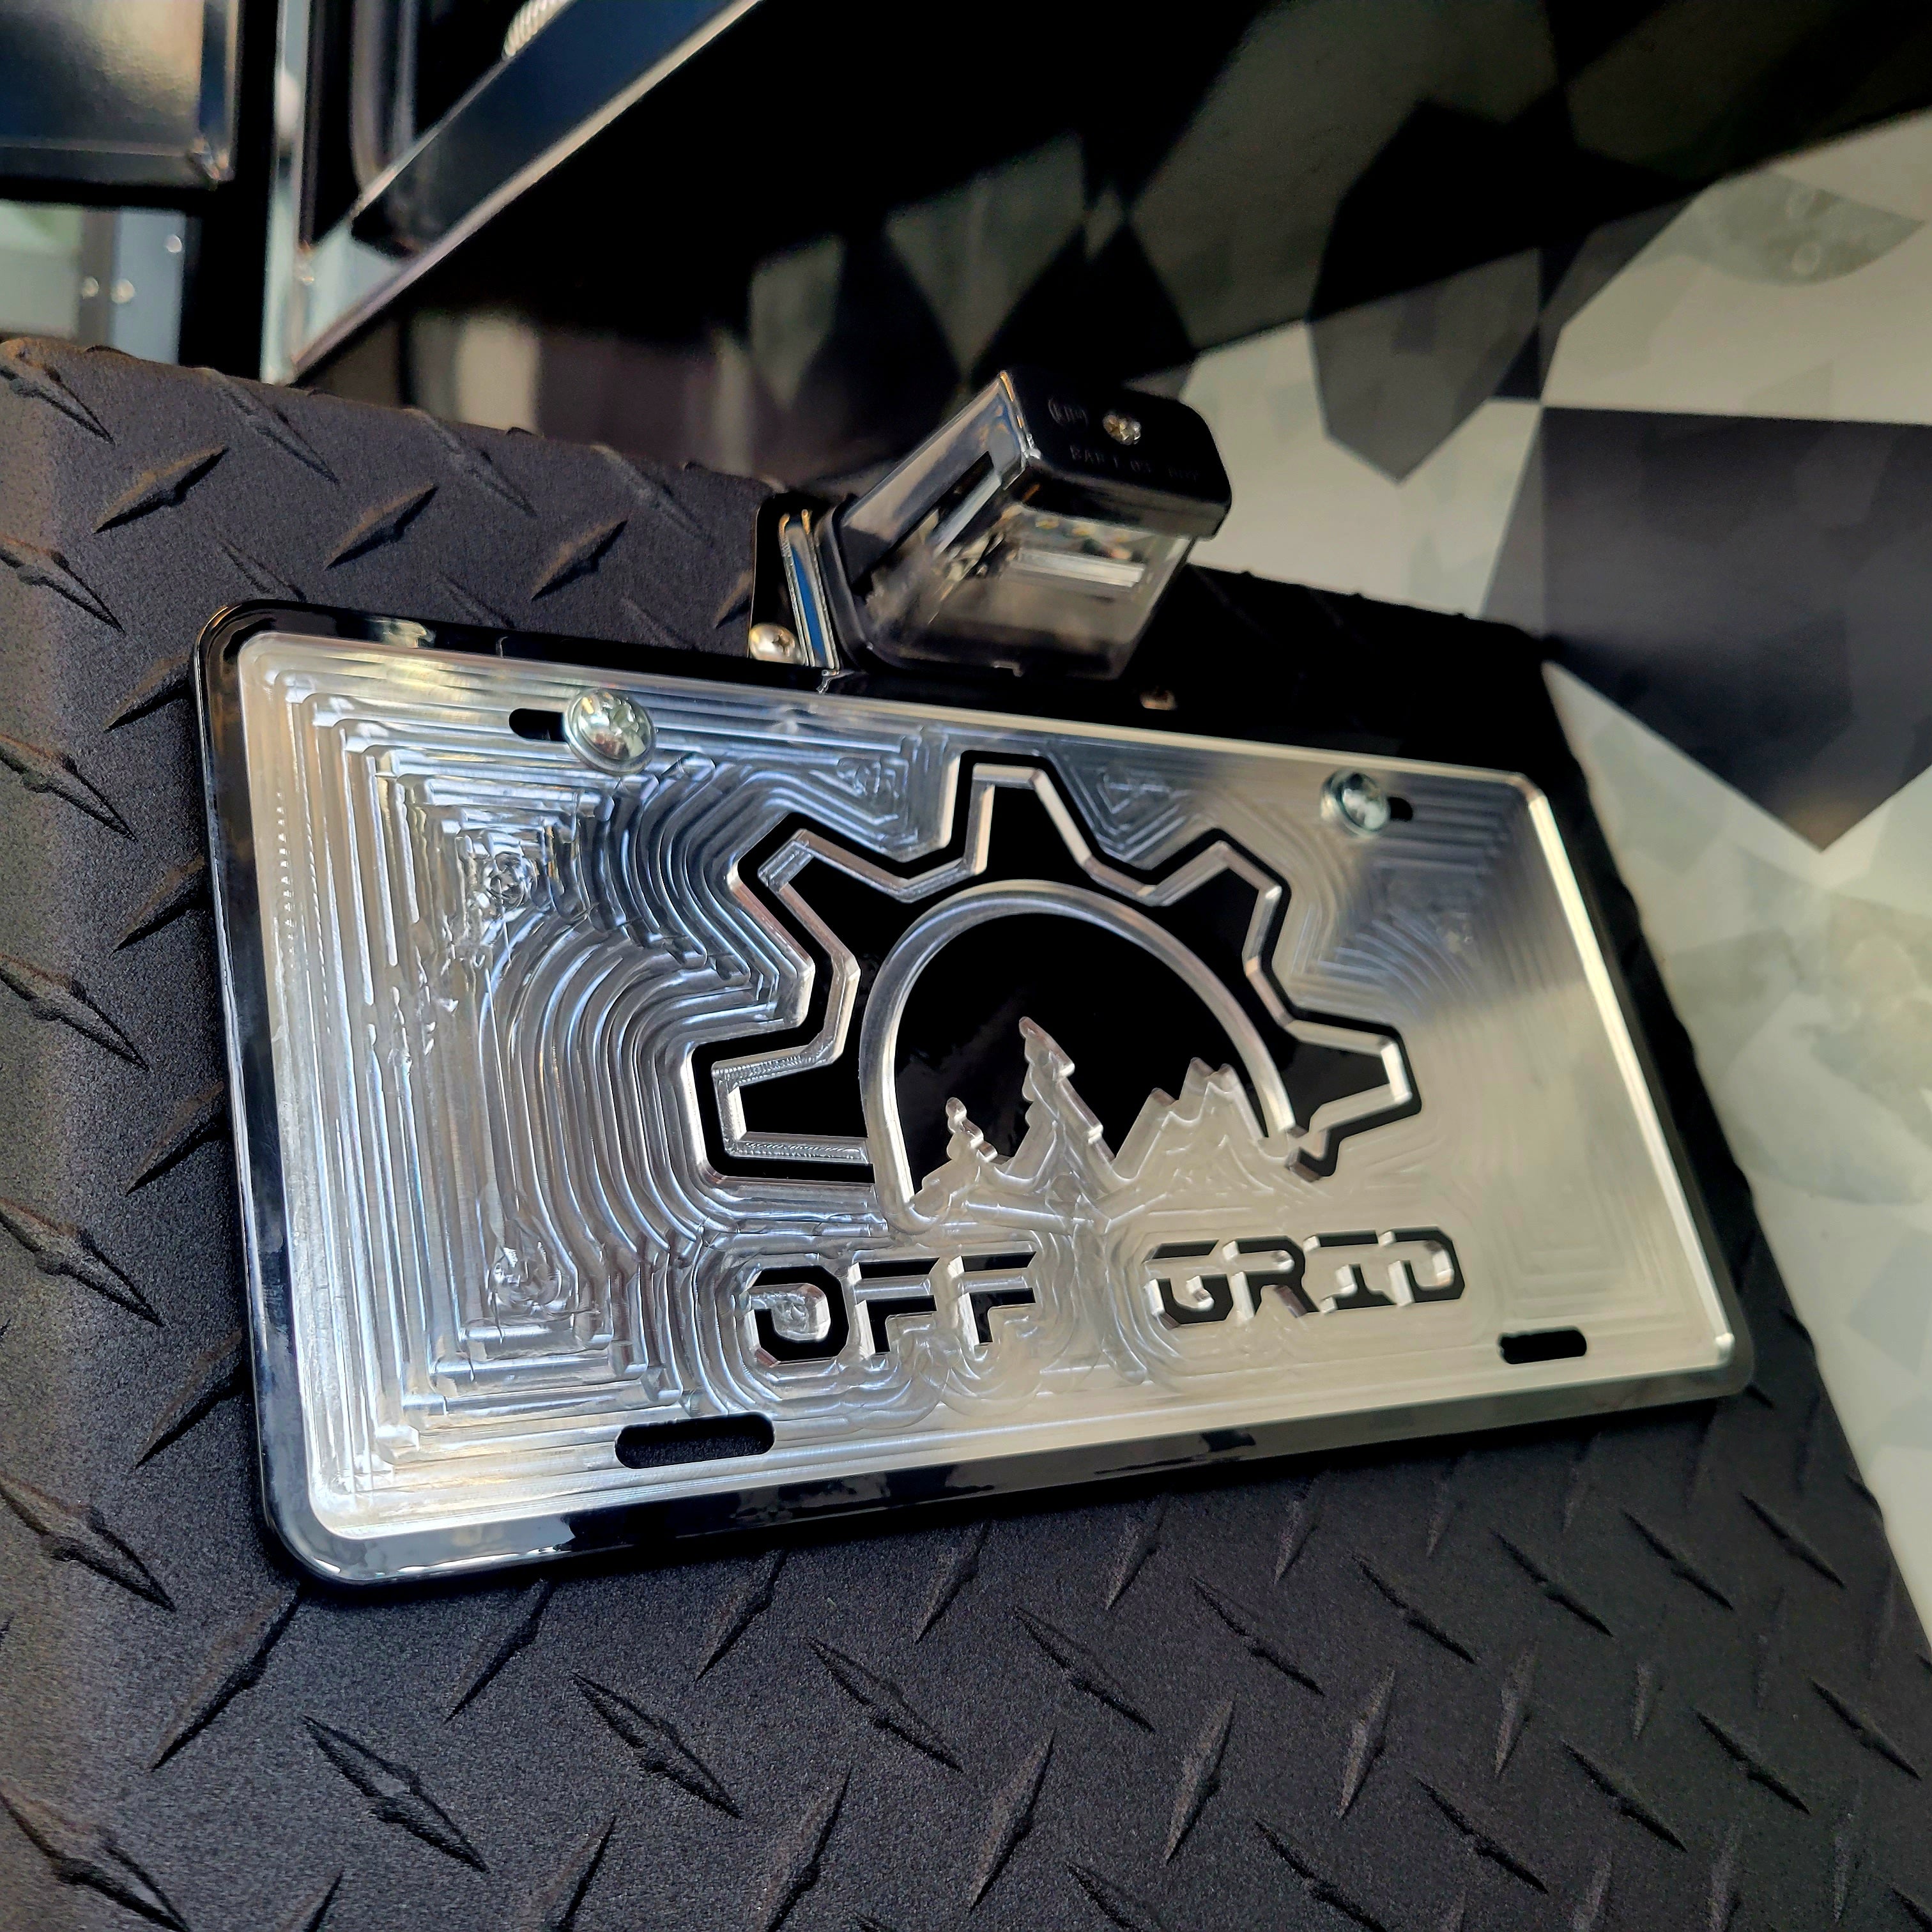 Off Grid Trailers License Plate Light (Driver's Side)